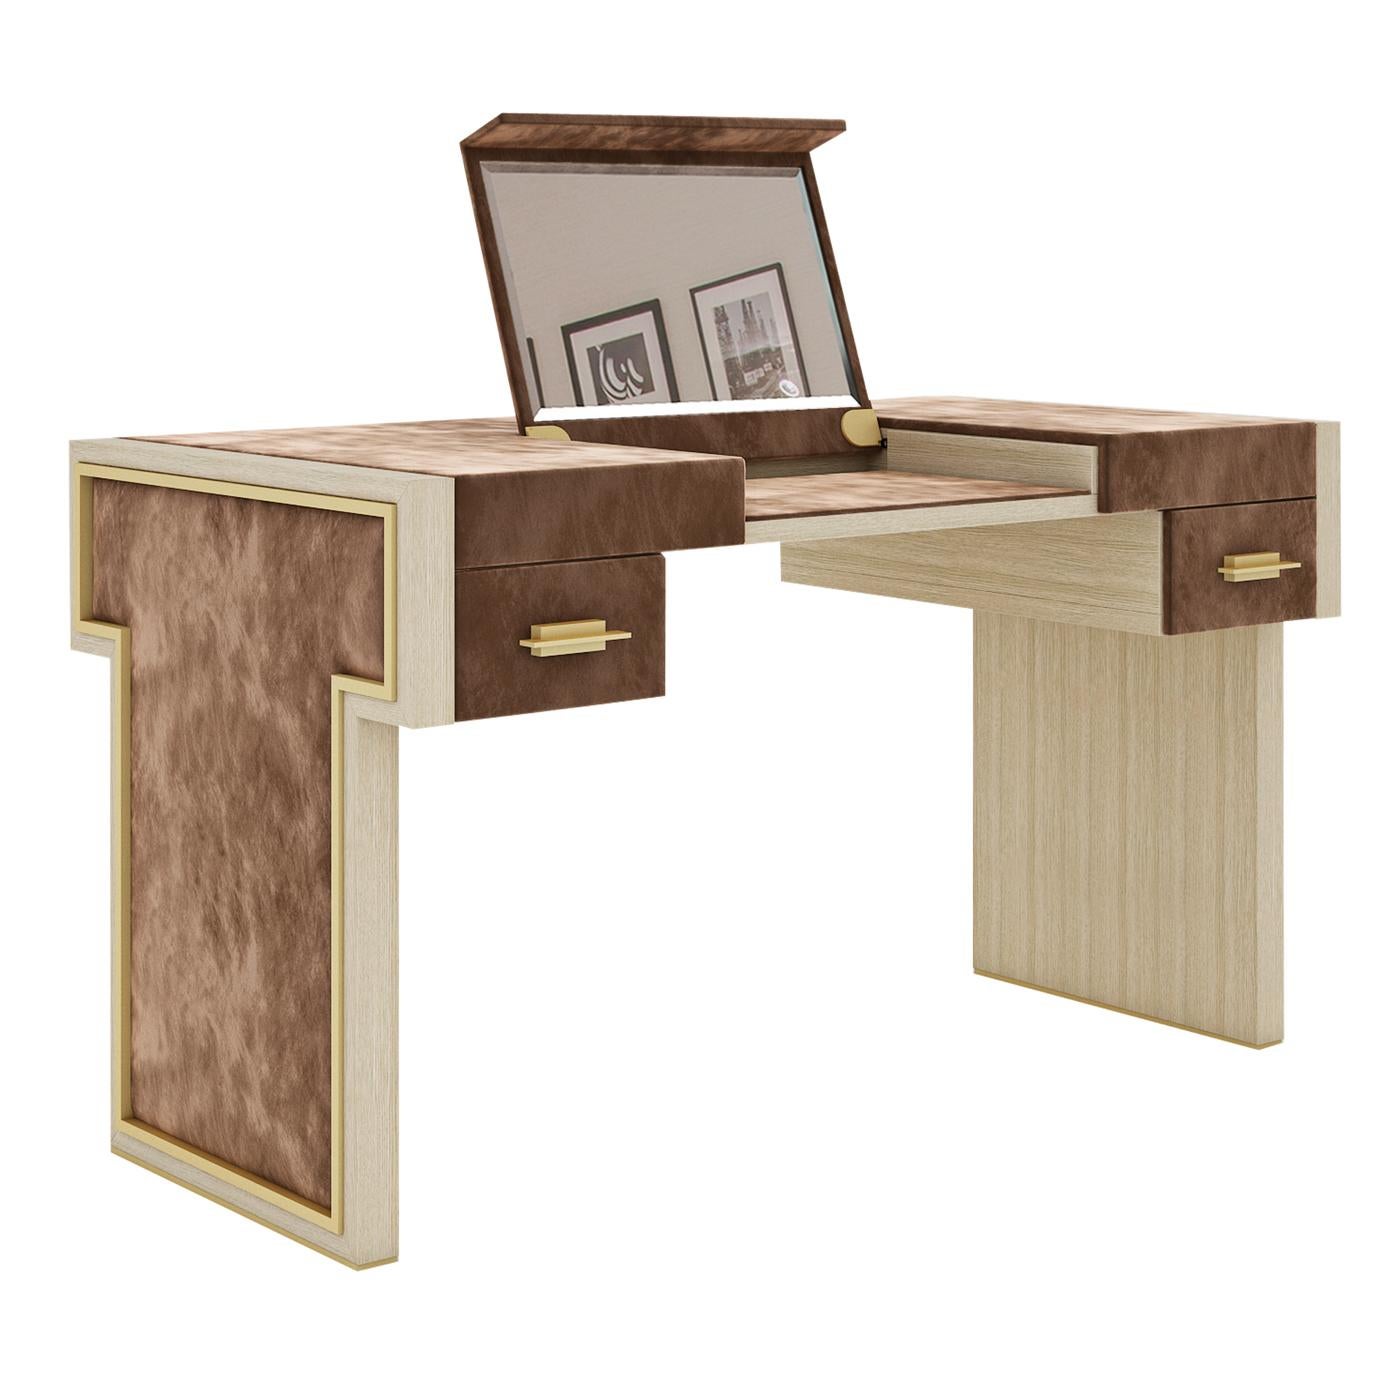 Showcasing a beige-lacquered wooden structure, complemented by prized leather upholstery, this outstanding vanity table will be a lavish addition to sophisticated interiors. Equipped with two small yet practical dressers, this piece also features a